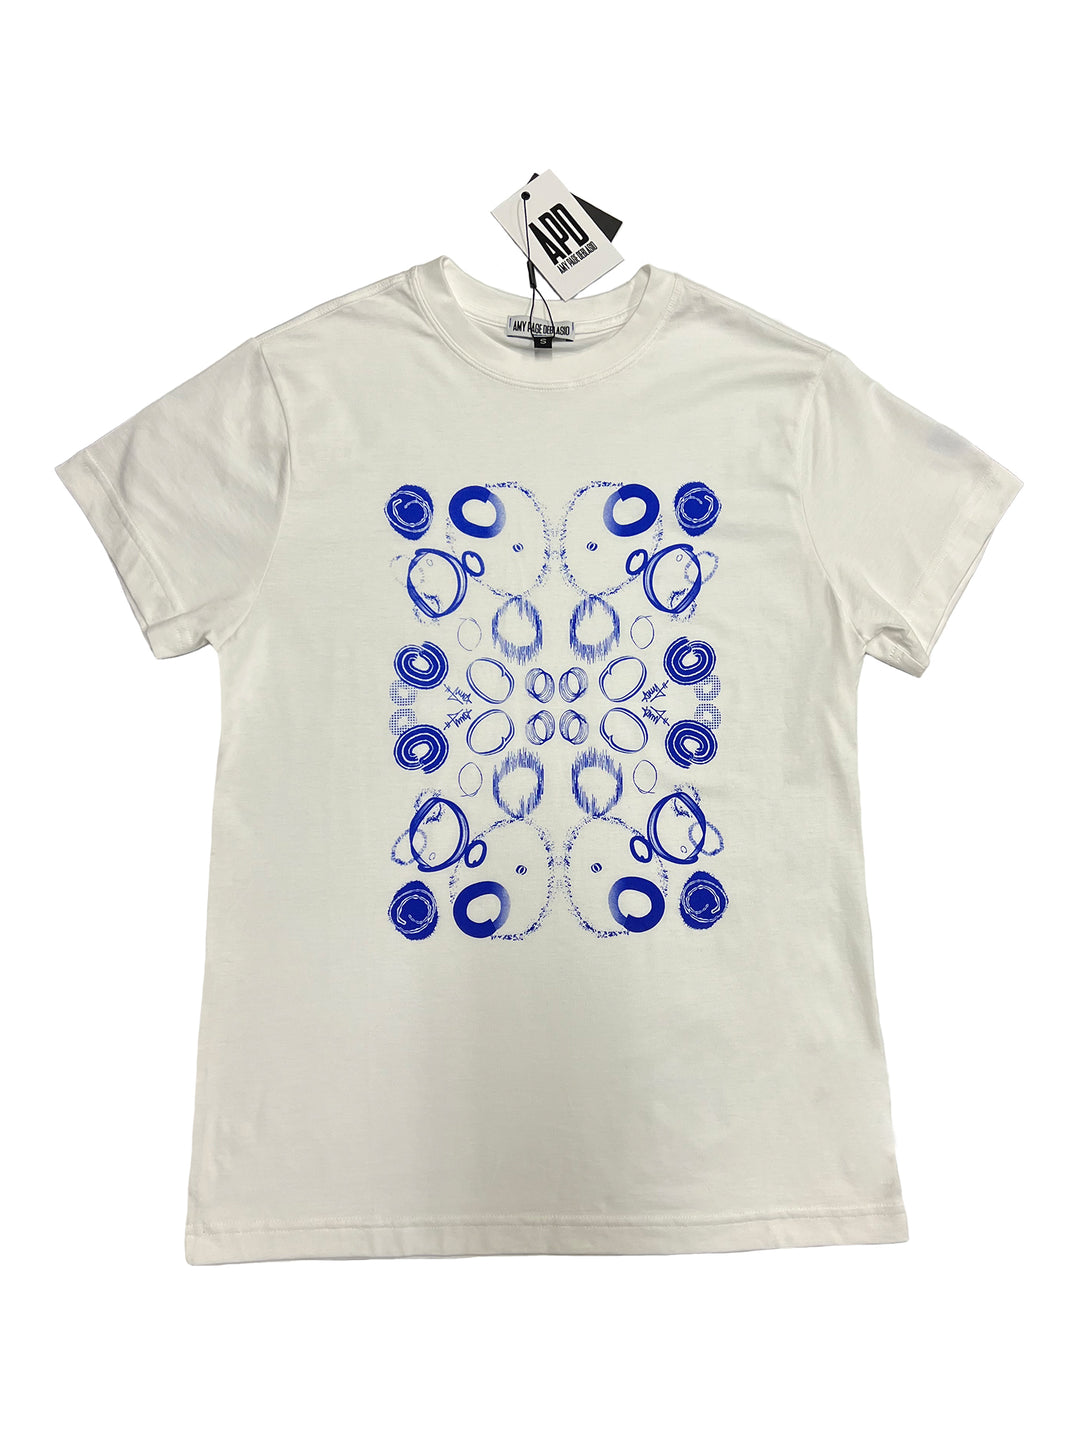 Star of David Edition T-Shirt with Custom Print Graphic in White Supima® Cotton